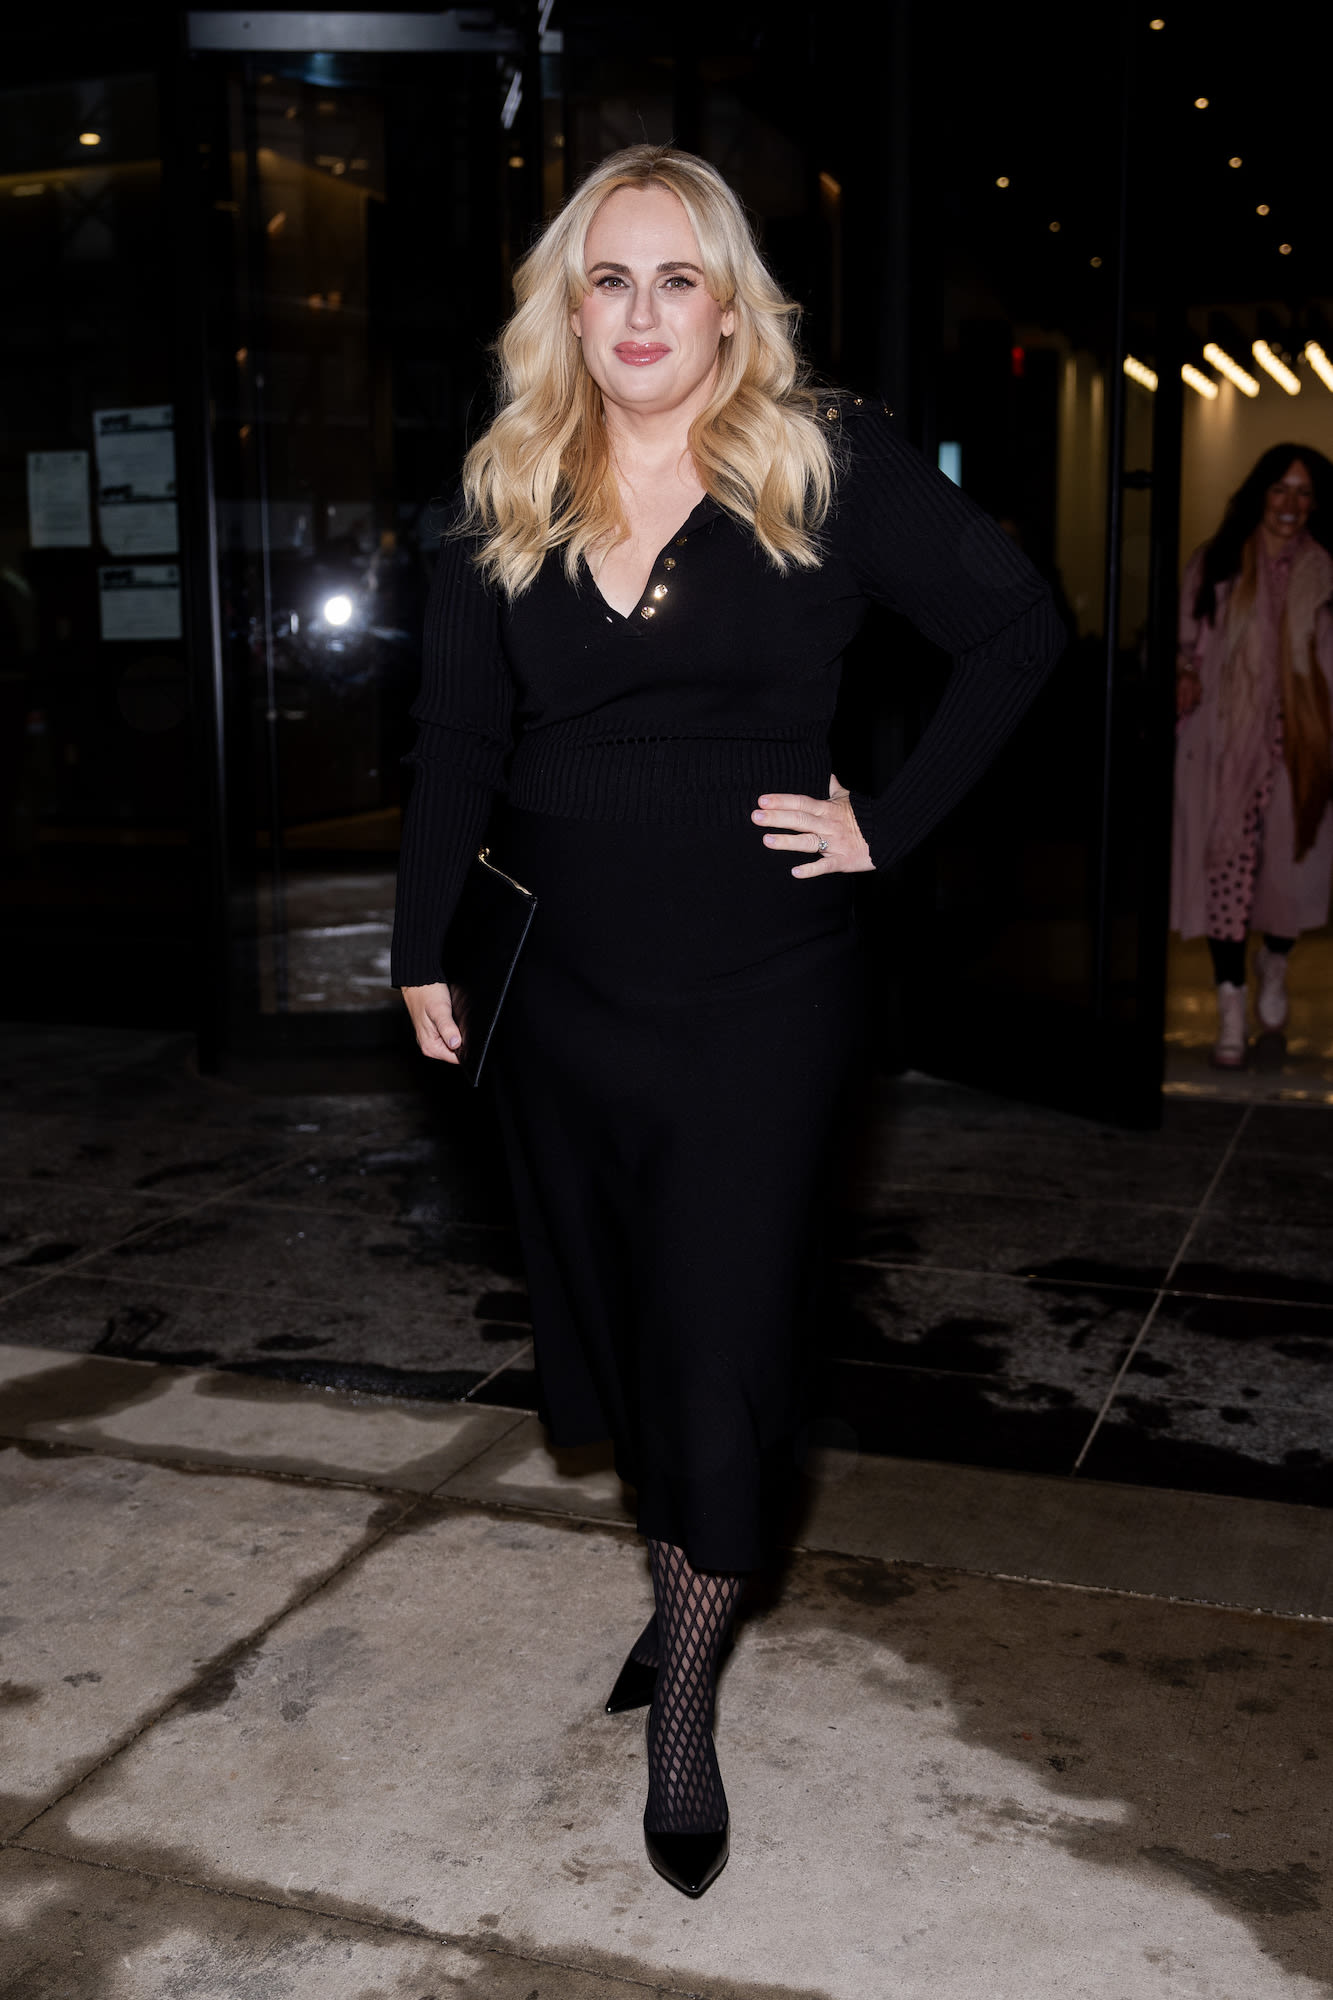 Rebel Wilson Recalls Drug-Fueled 'Orgy' Party With Royal Family Member